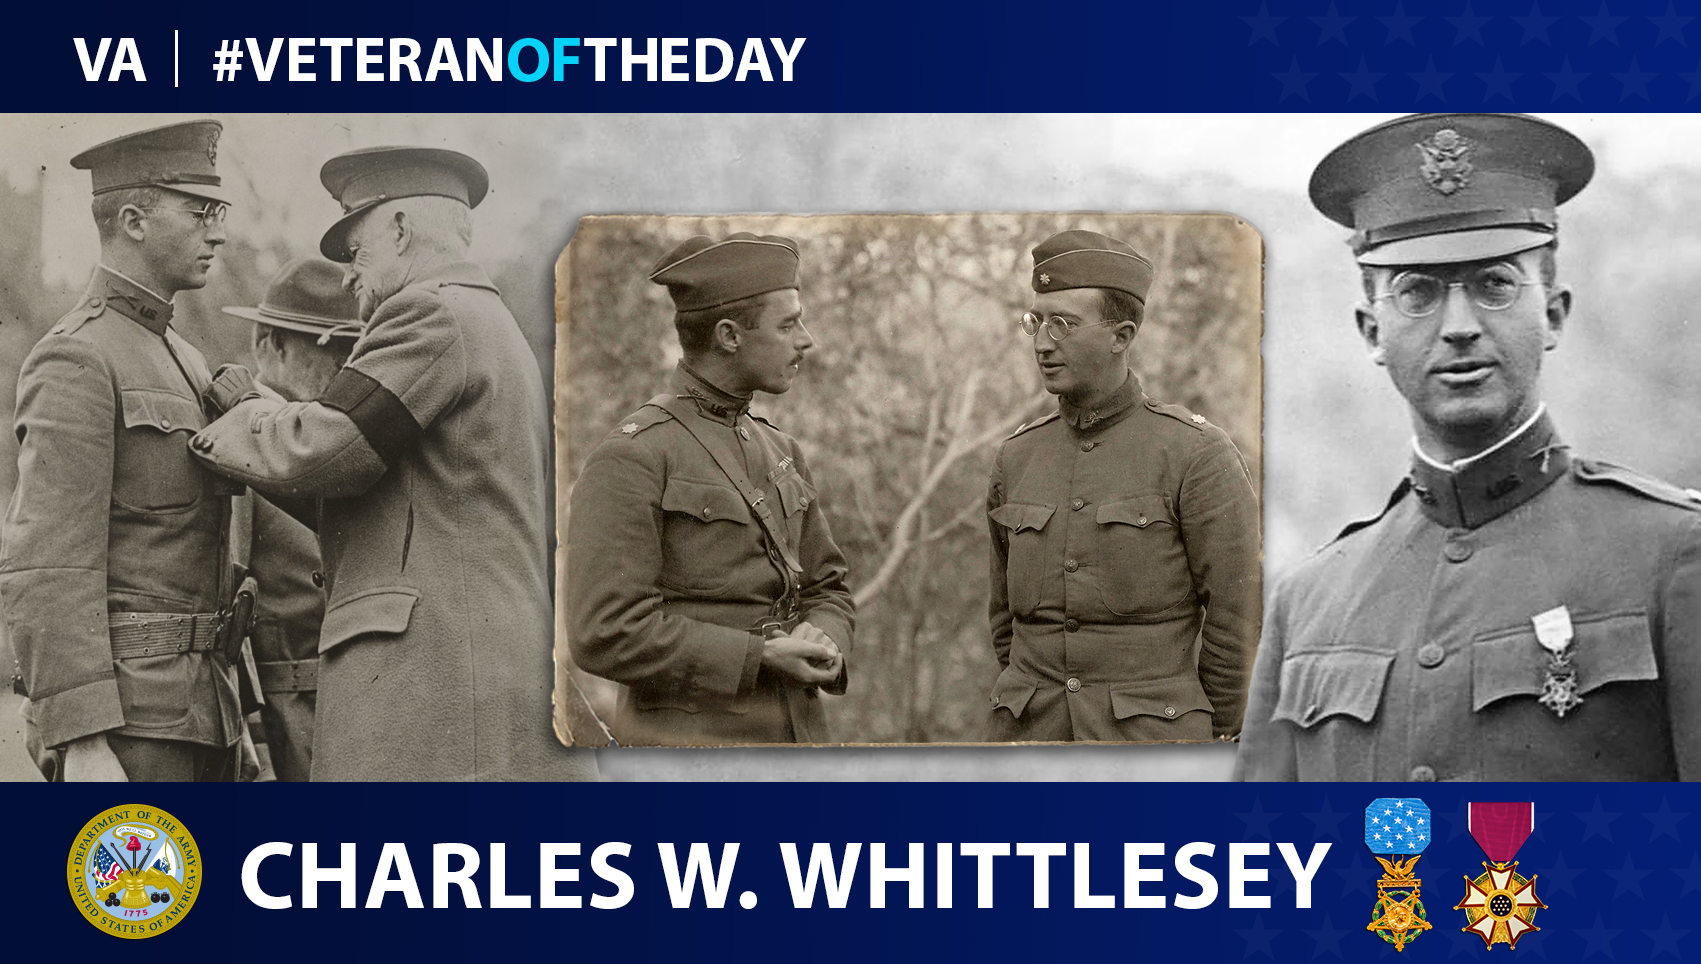 Army Veteran Charles W. Whittlesey is today’s Veteran of the Day.